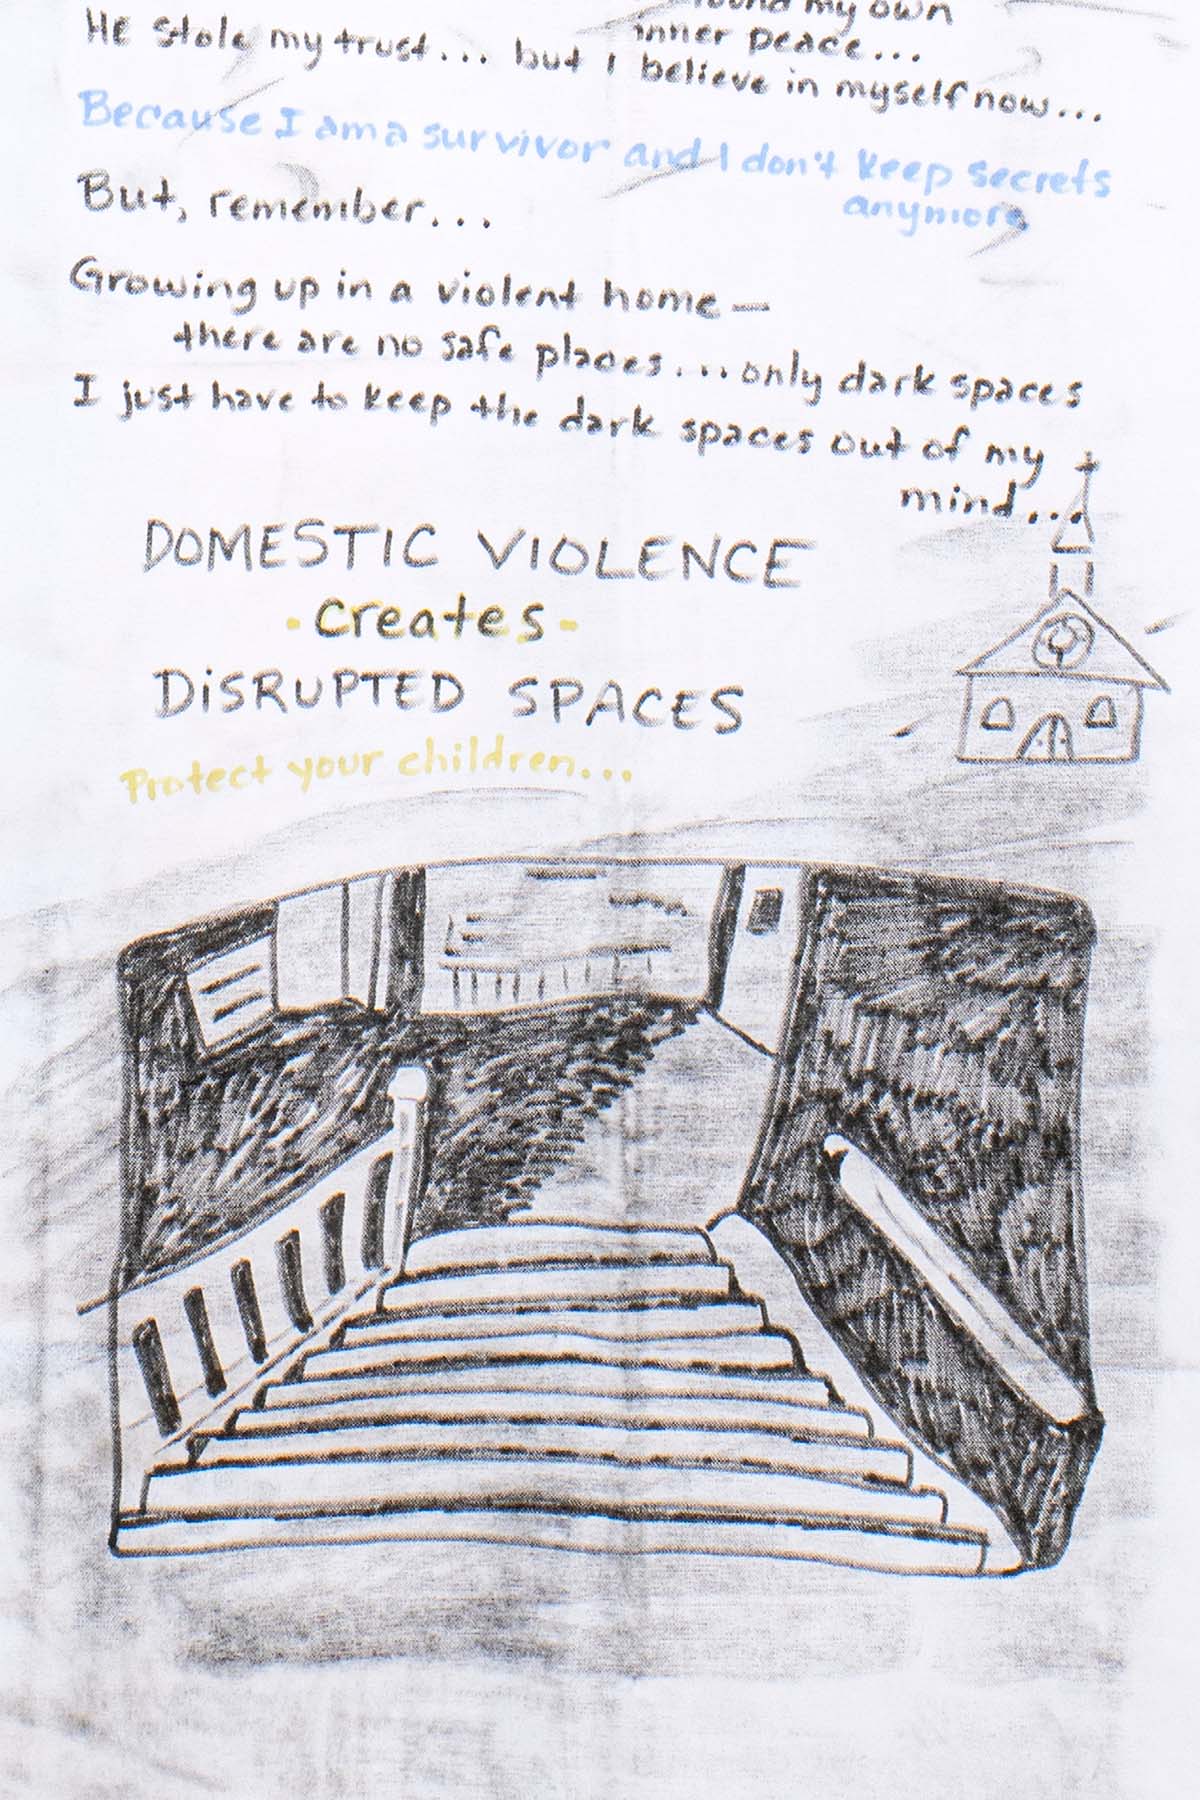 A close-up photograph of the grim, dark space with the words, 'Domestic violence creates DISRUPTED SPACES Protect your children...'